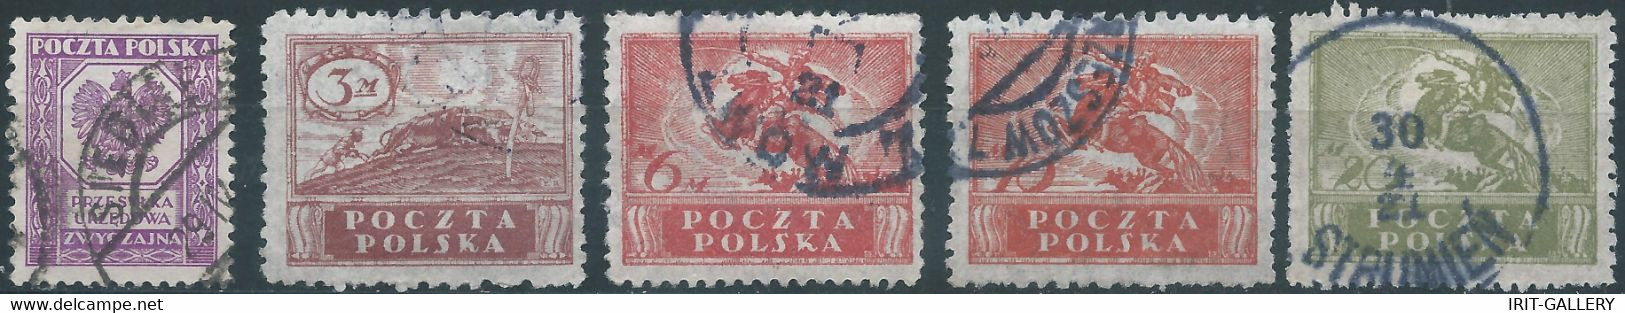 POLONIA-POLAND-POLSKA,1919 South And North Poland Issues,Obliterated - Usados